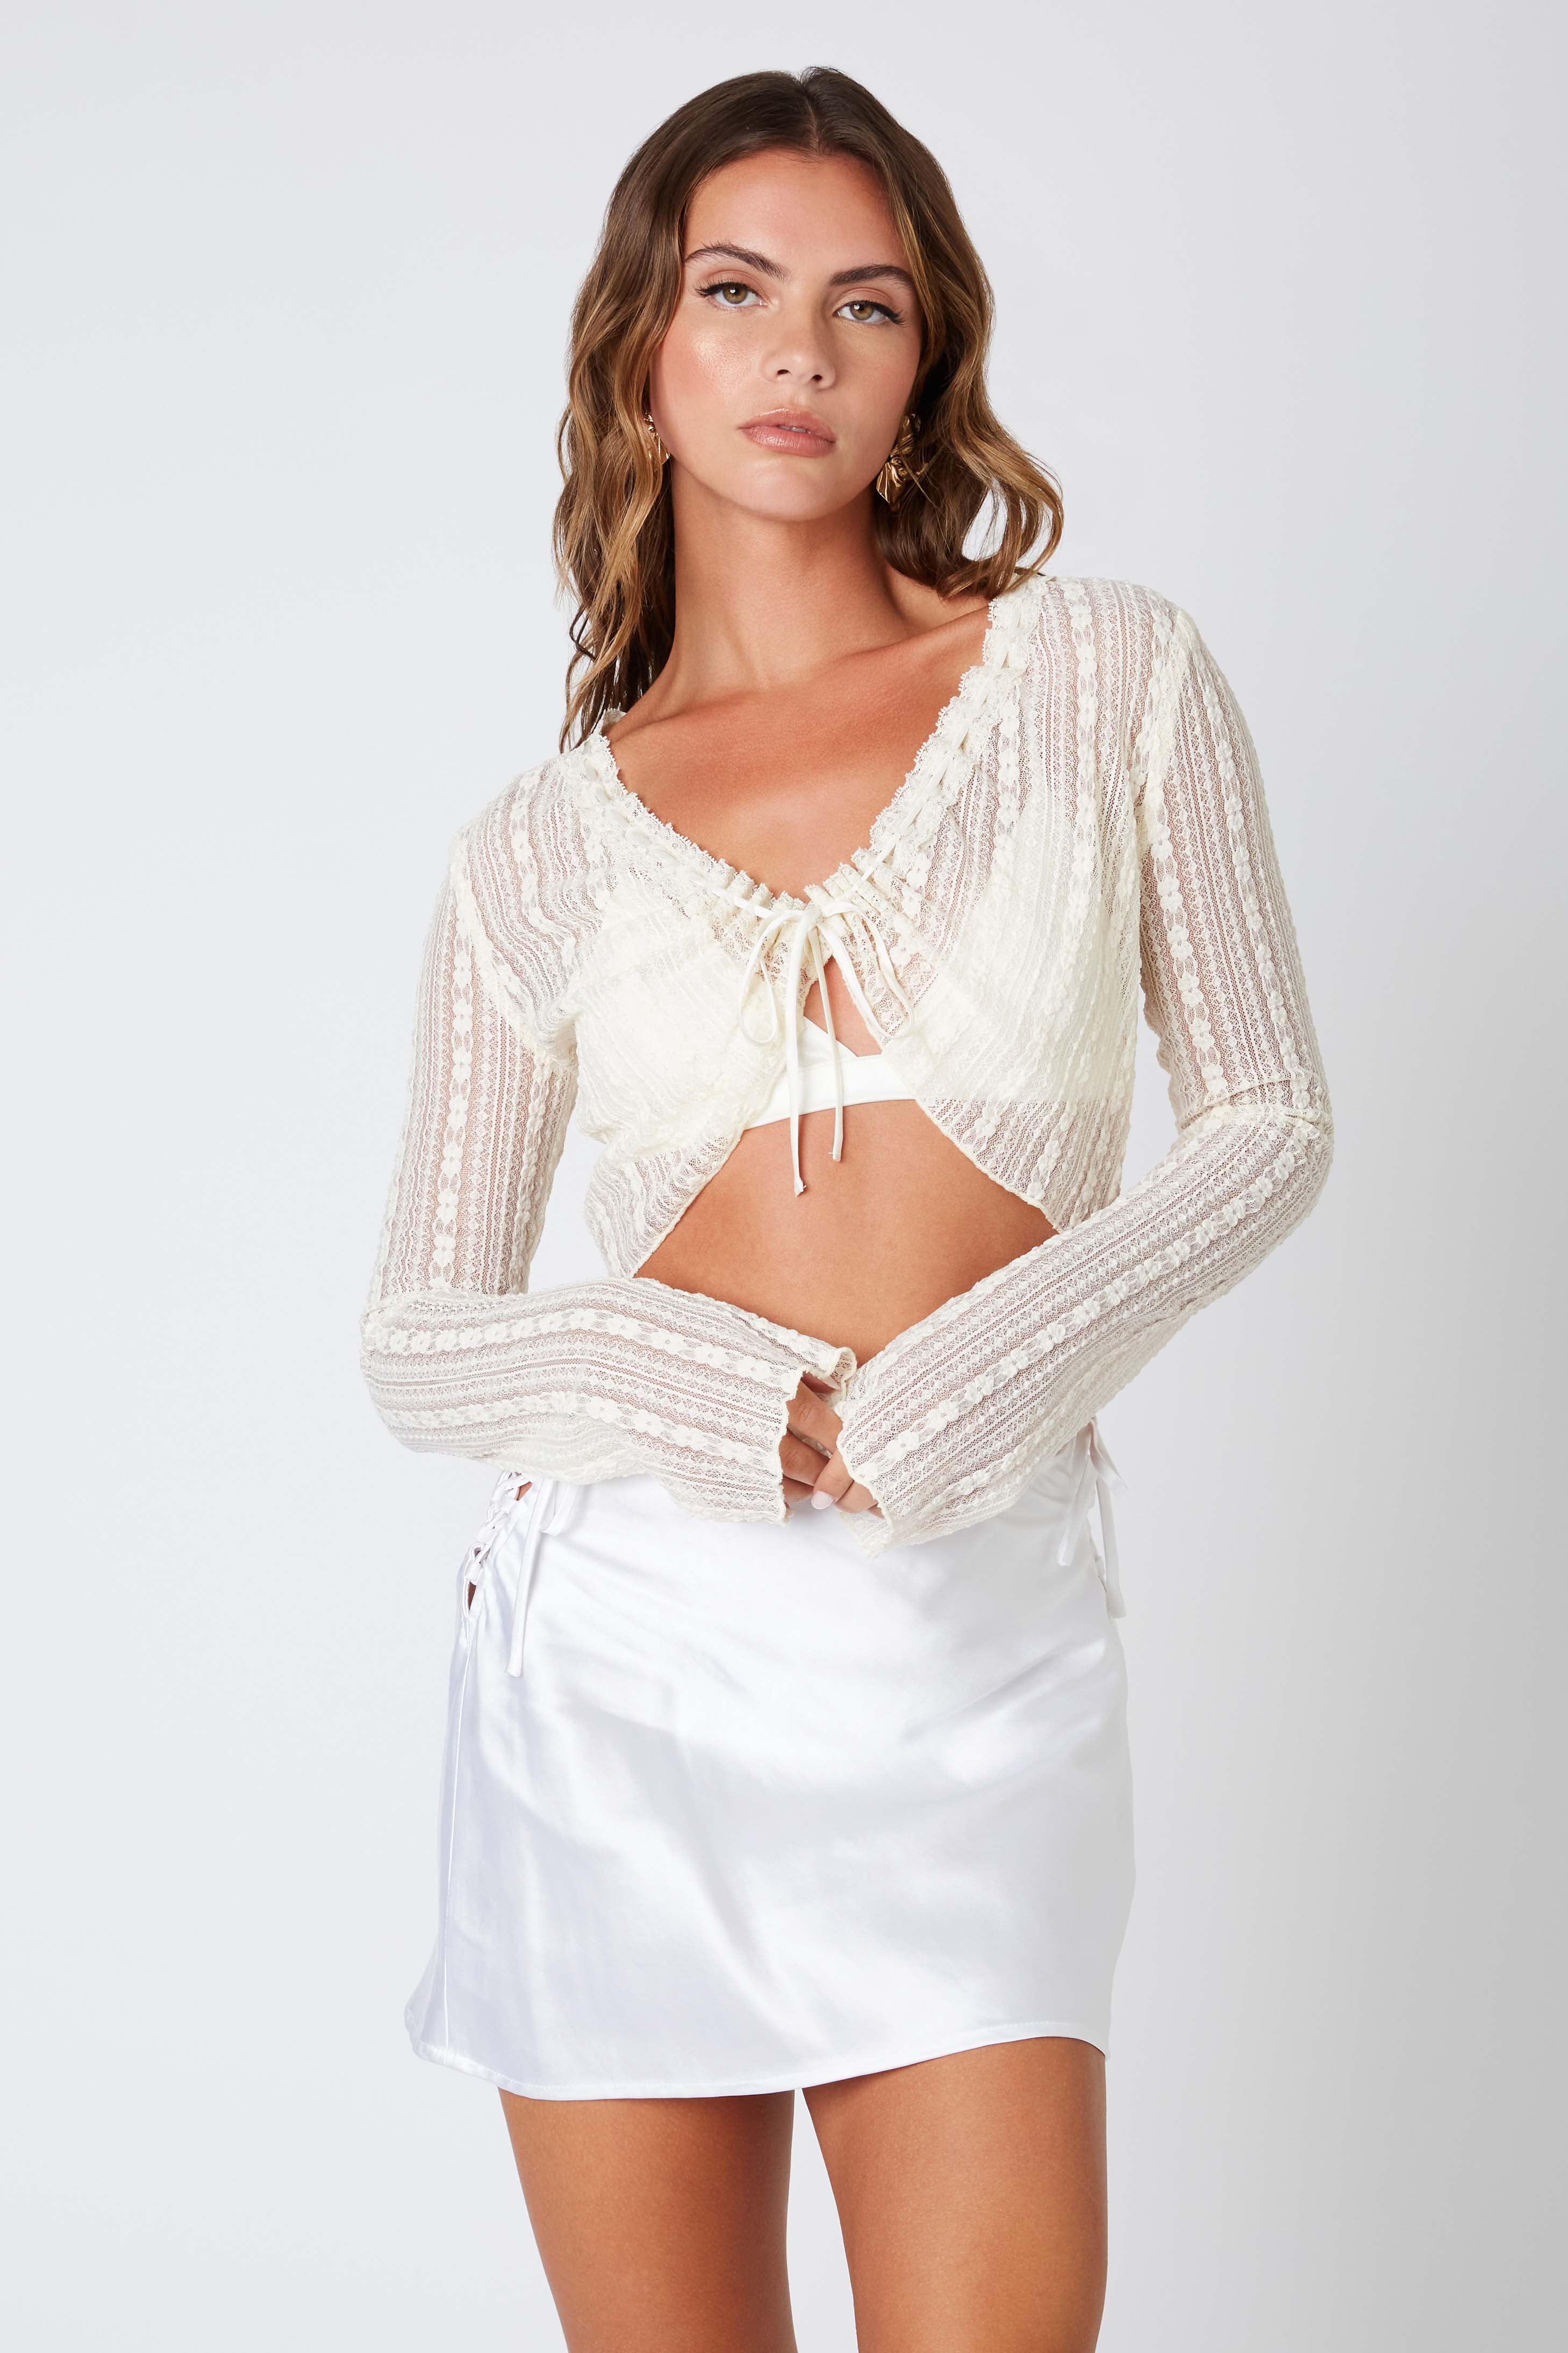 Lace Crop Top in Ivory Front View